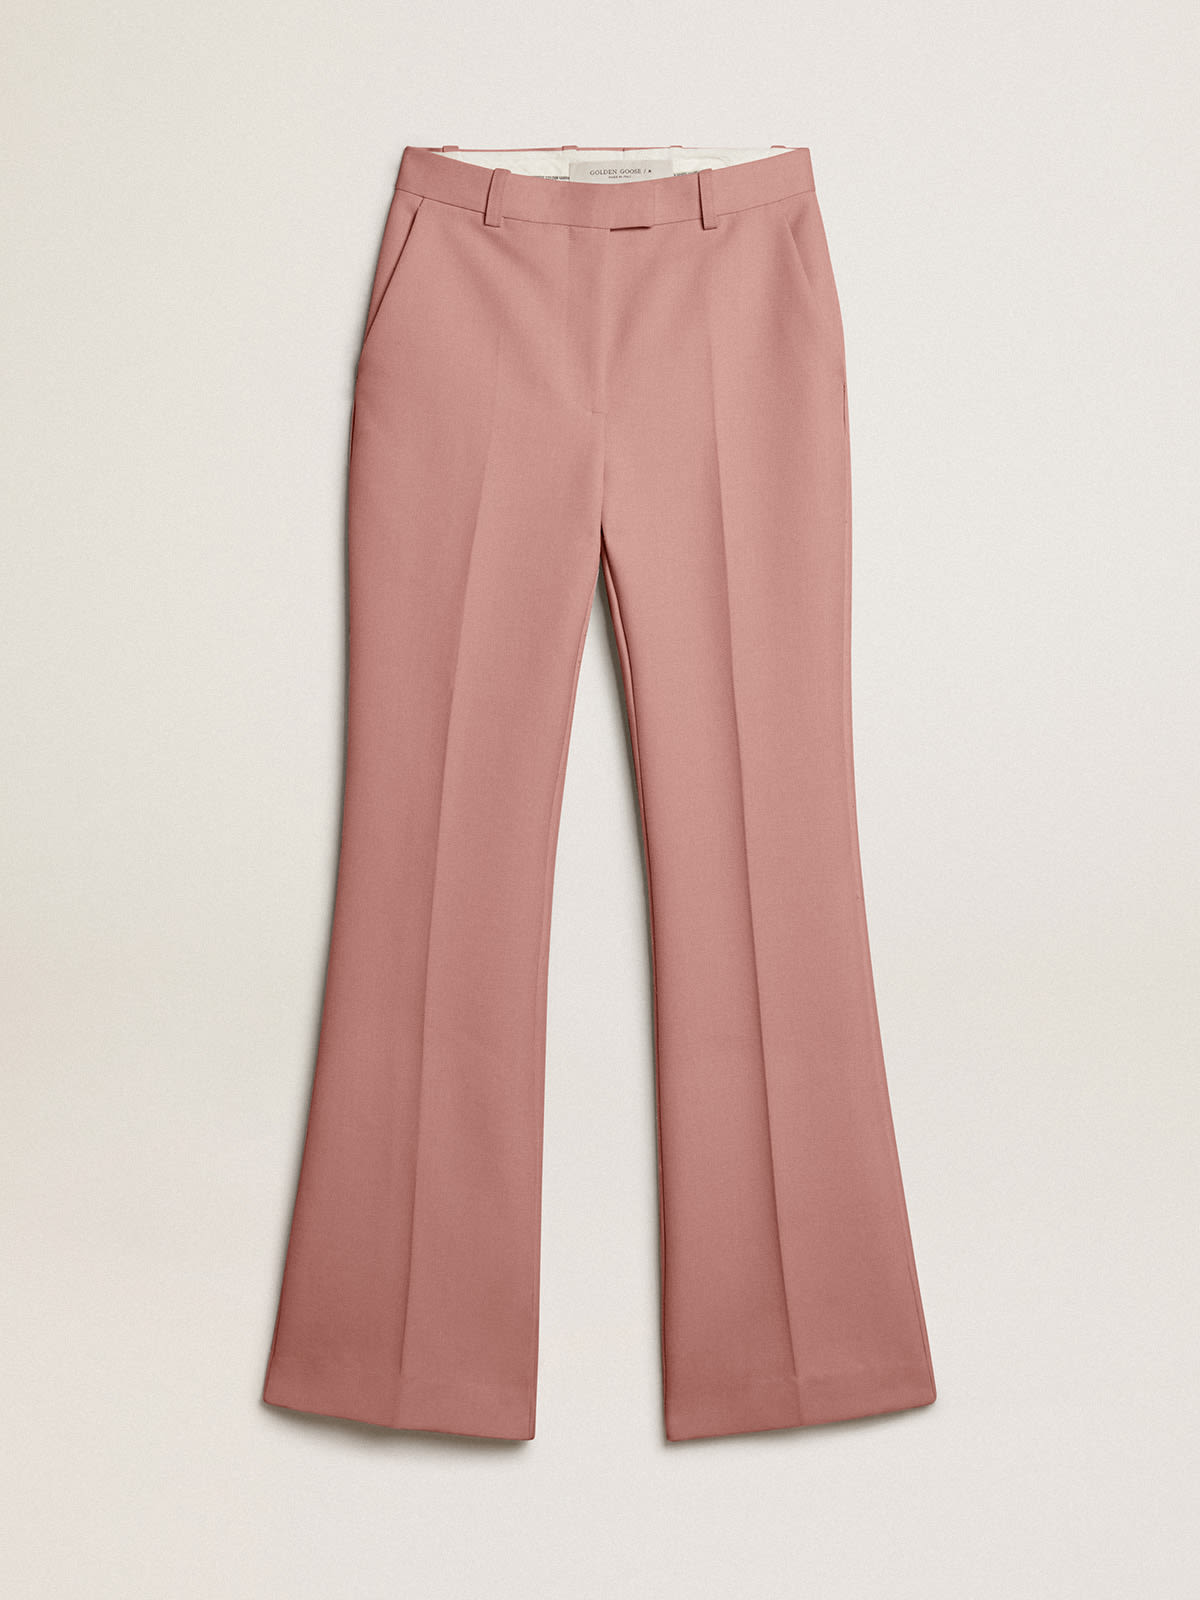 Golden Goose - Pants in pink tailoring fabric in 